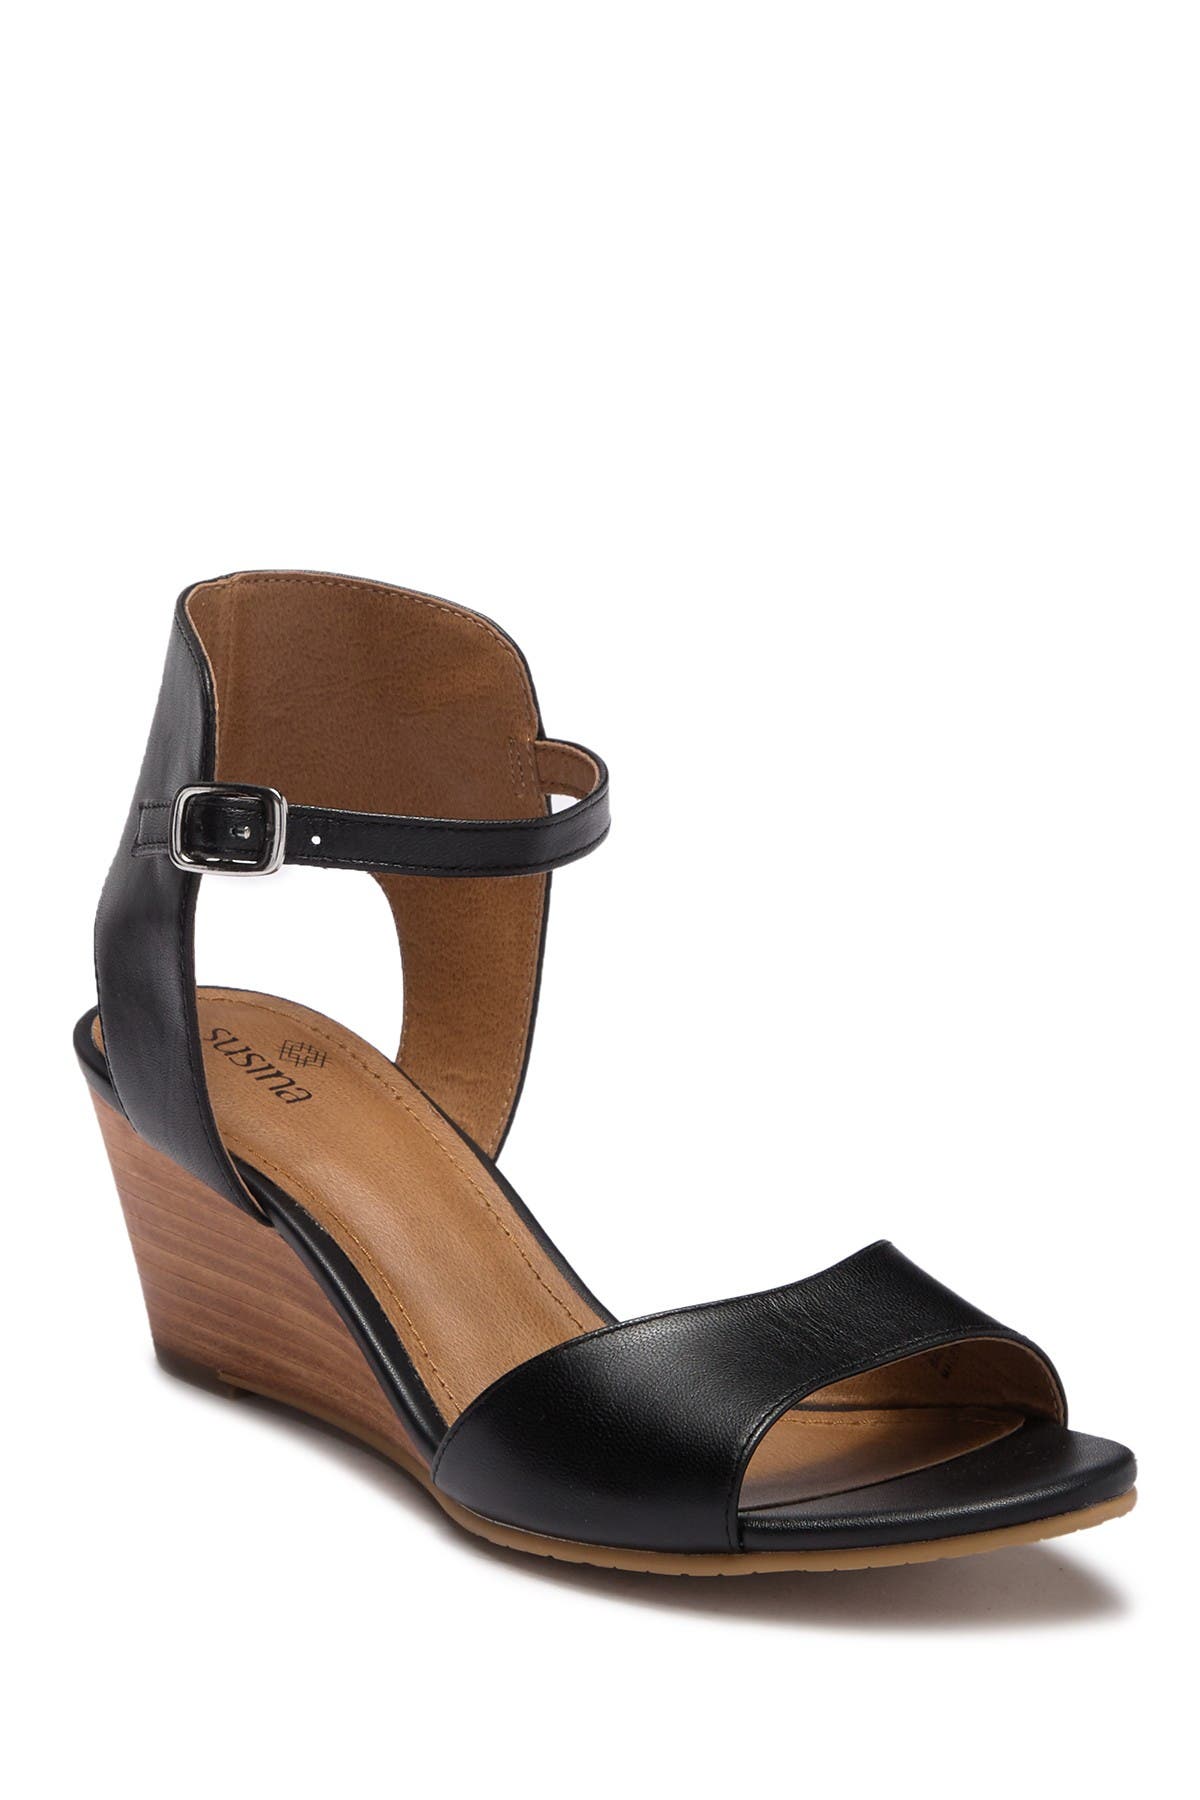 nordstrom rack susina shoes